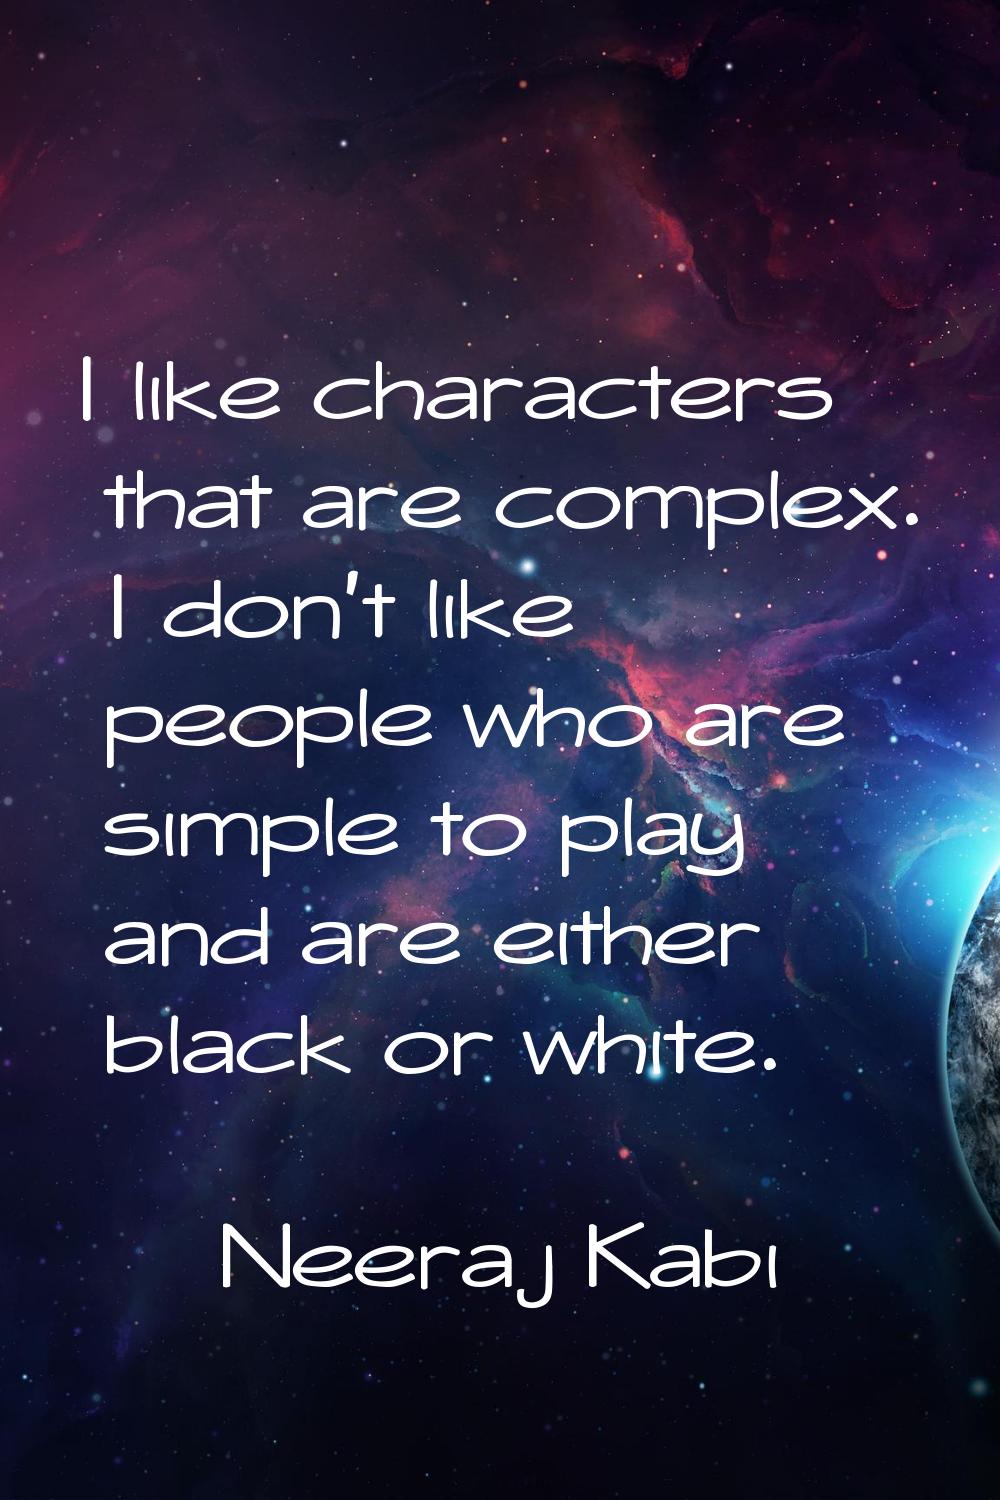 I like characters that are complex. I don't like people who are simple to play and are either black